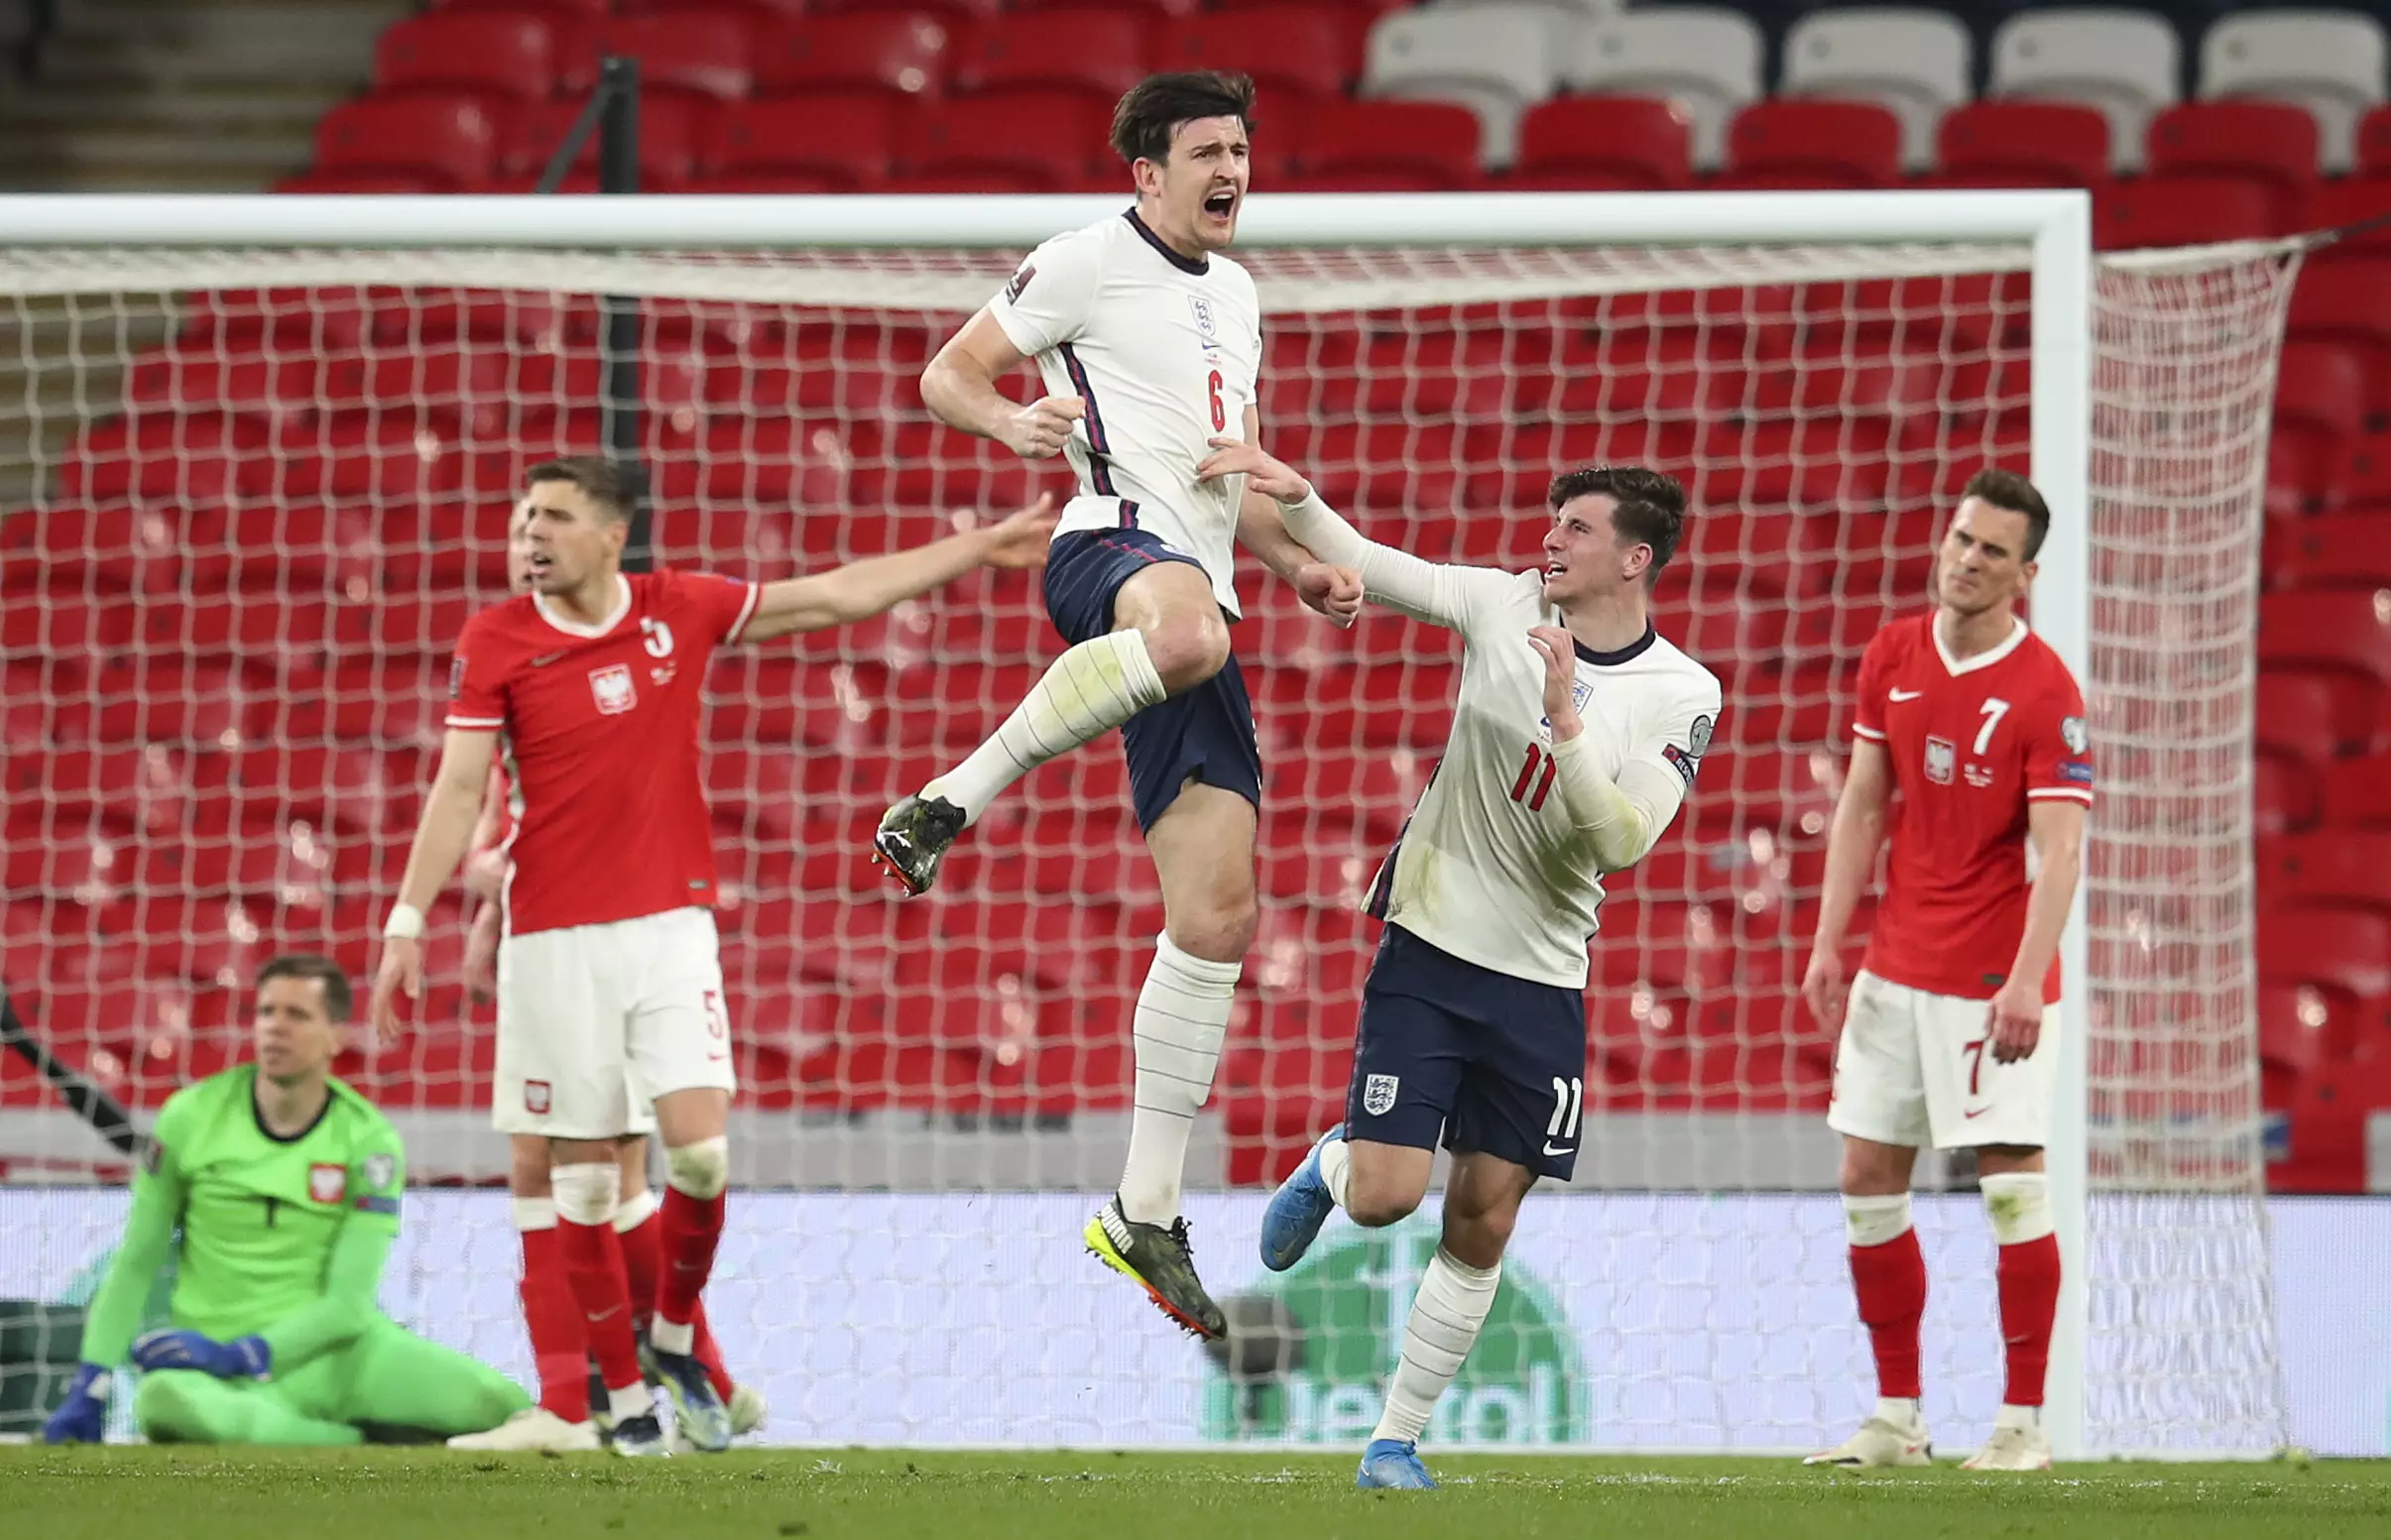 Maguire celebrates his winning goal against Poland last week. Image: PA Images